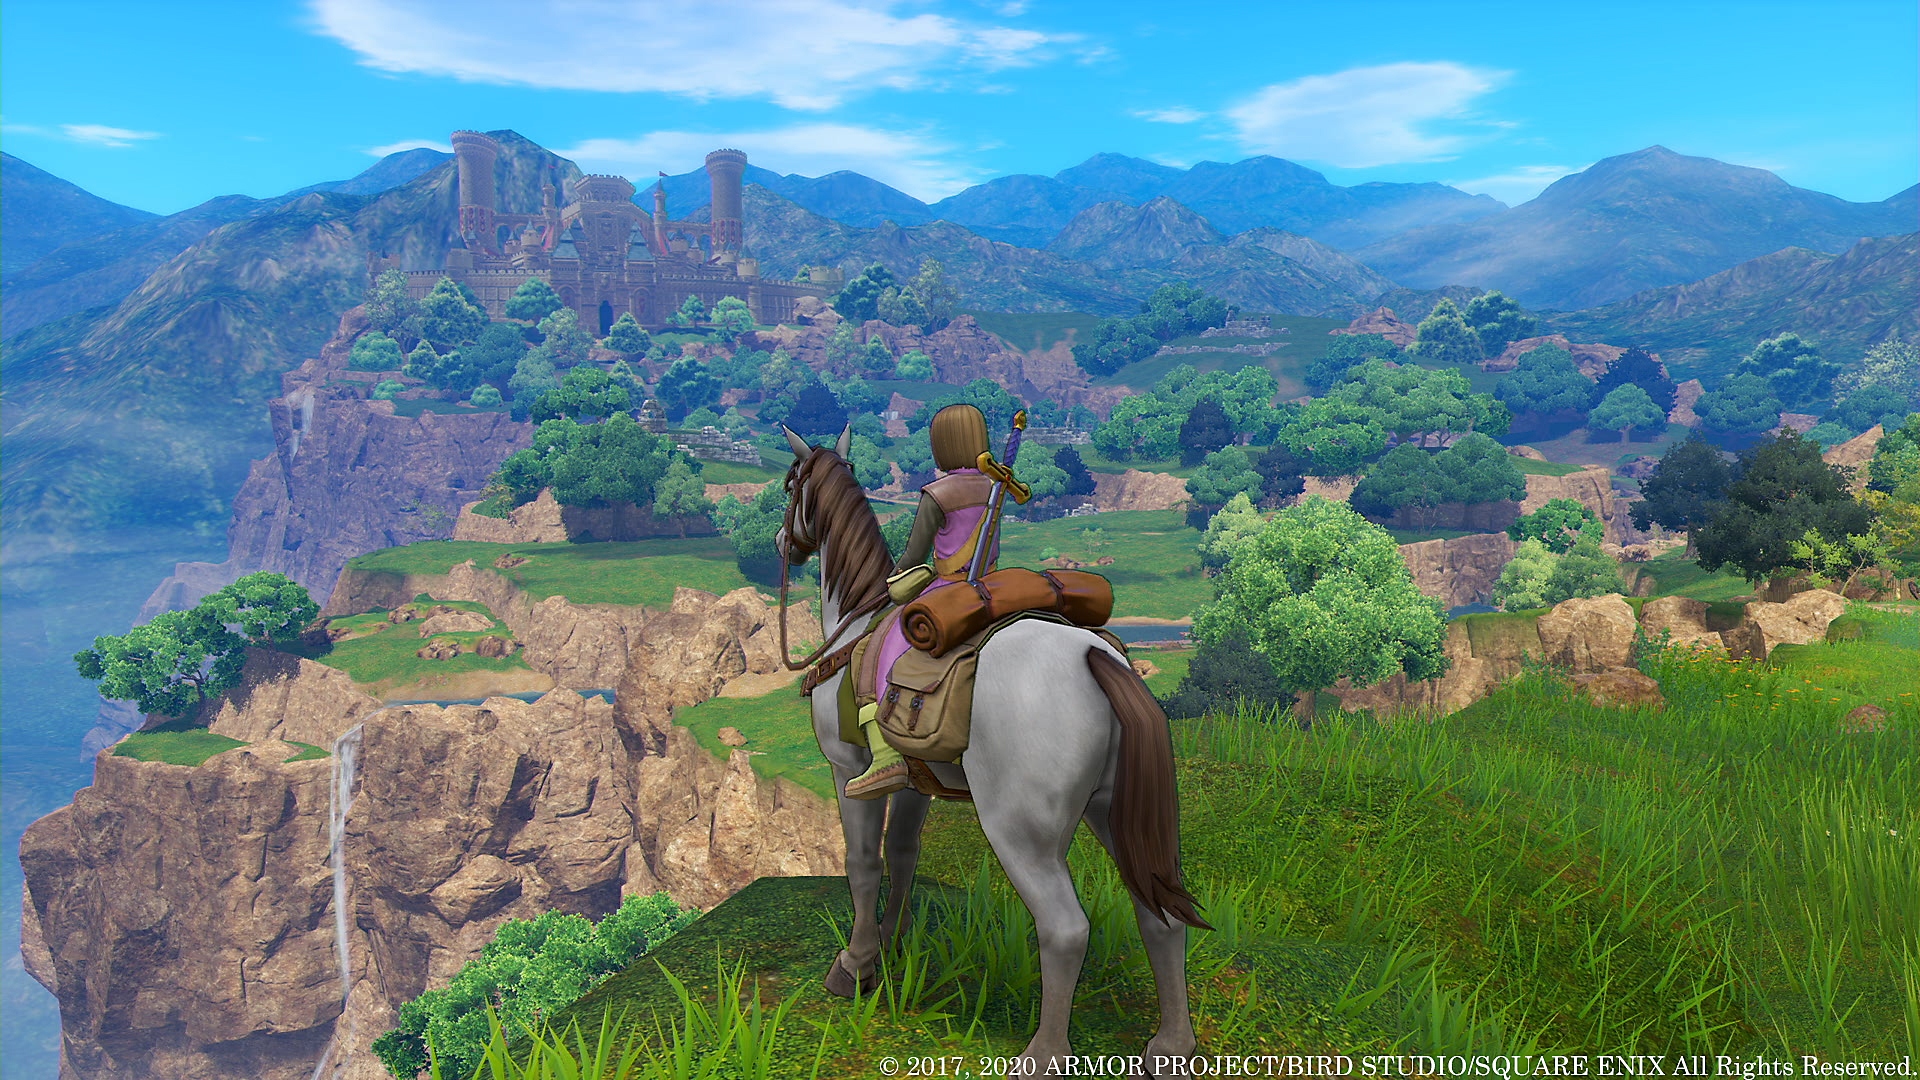 Dragon Quest XI: Echoes of an Elusive Age Gallery Screenshot 6